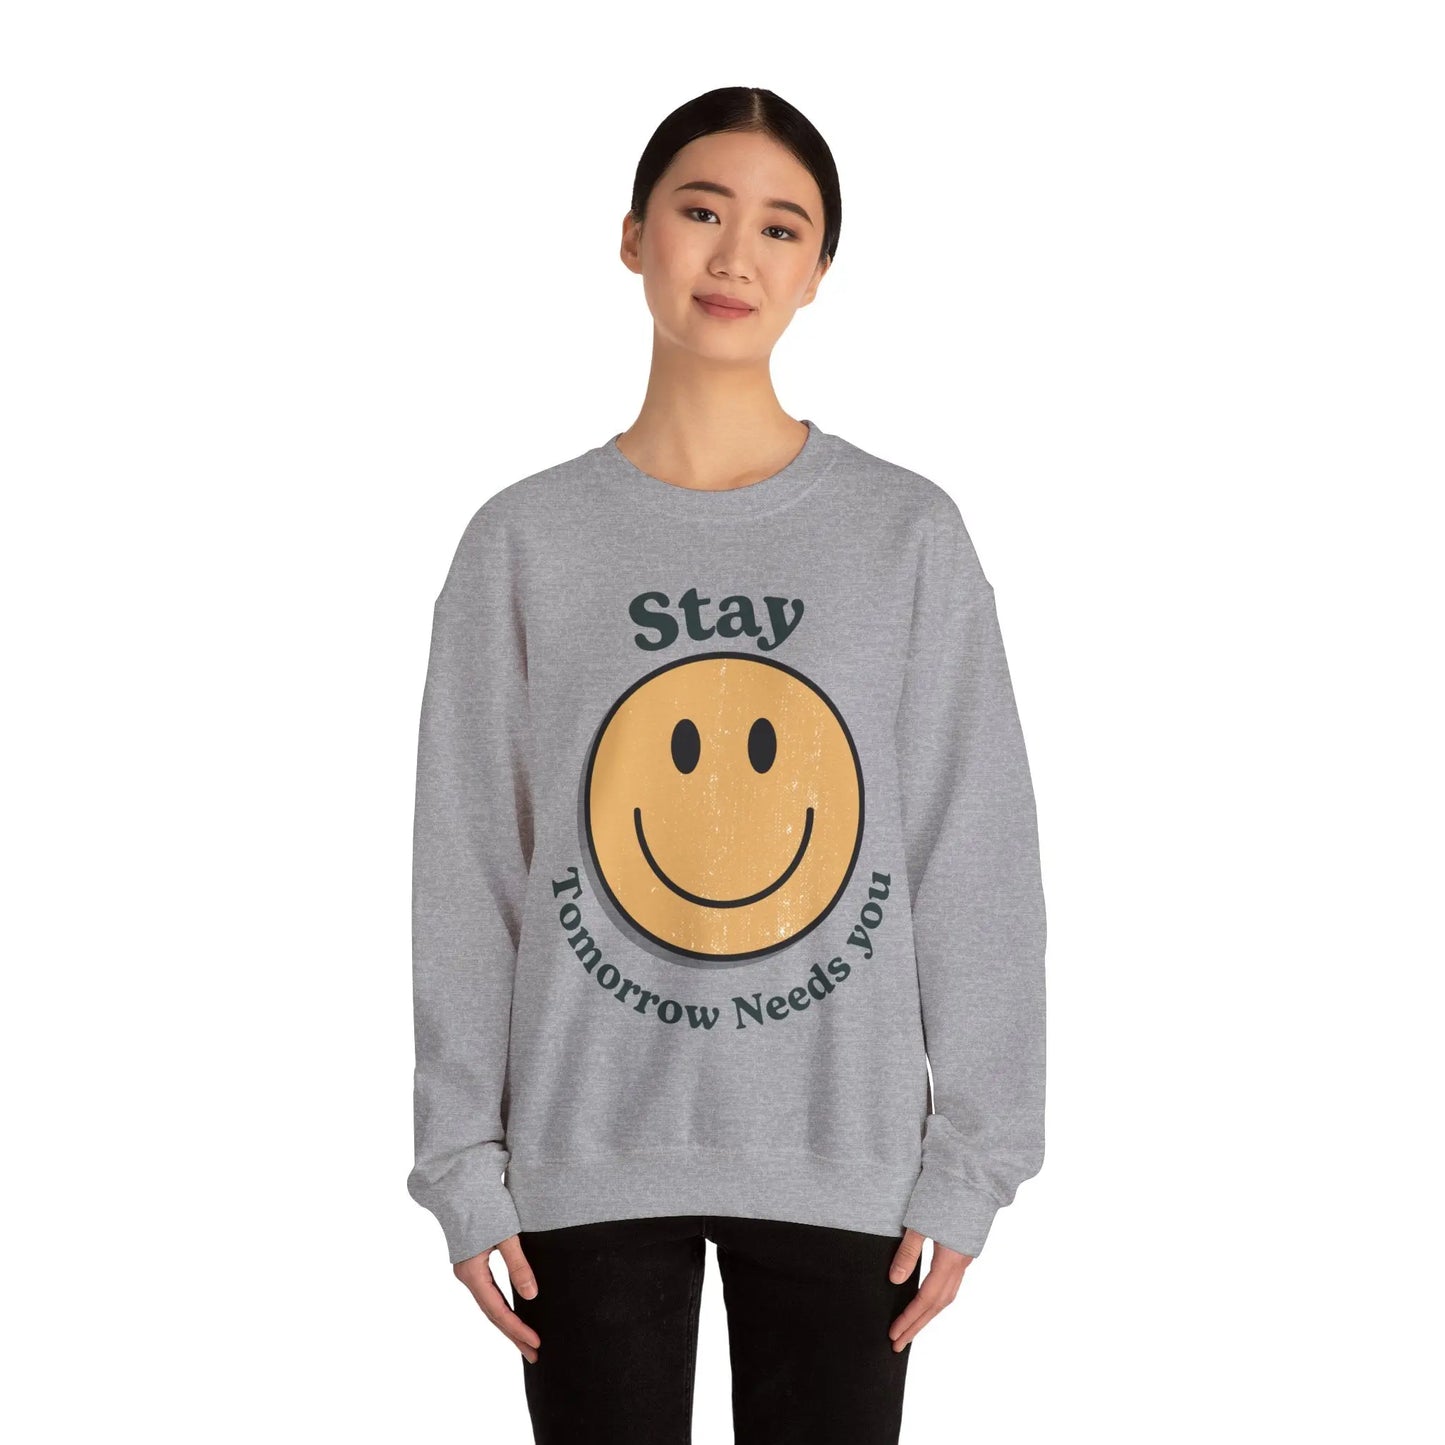 Retro Smiley Stay Tomorrow Needs You Sweatshirt Mental Health Awareness Suicide Prevention Mothers Day Fathers Day Gift Veterans Support Military Gift Summer 2024